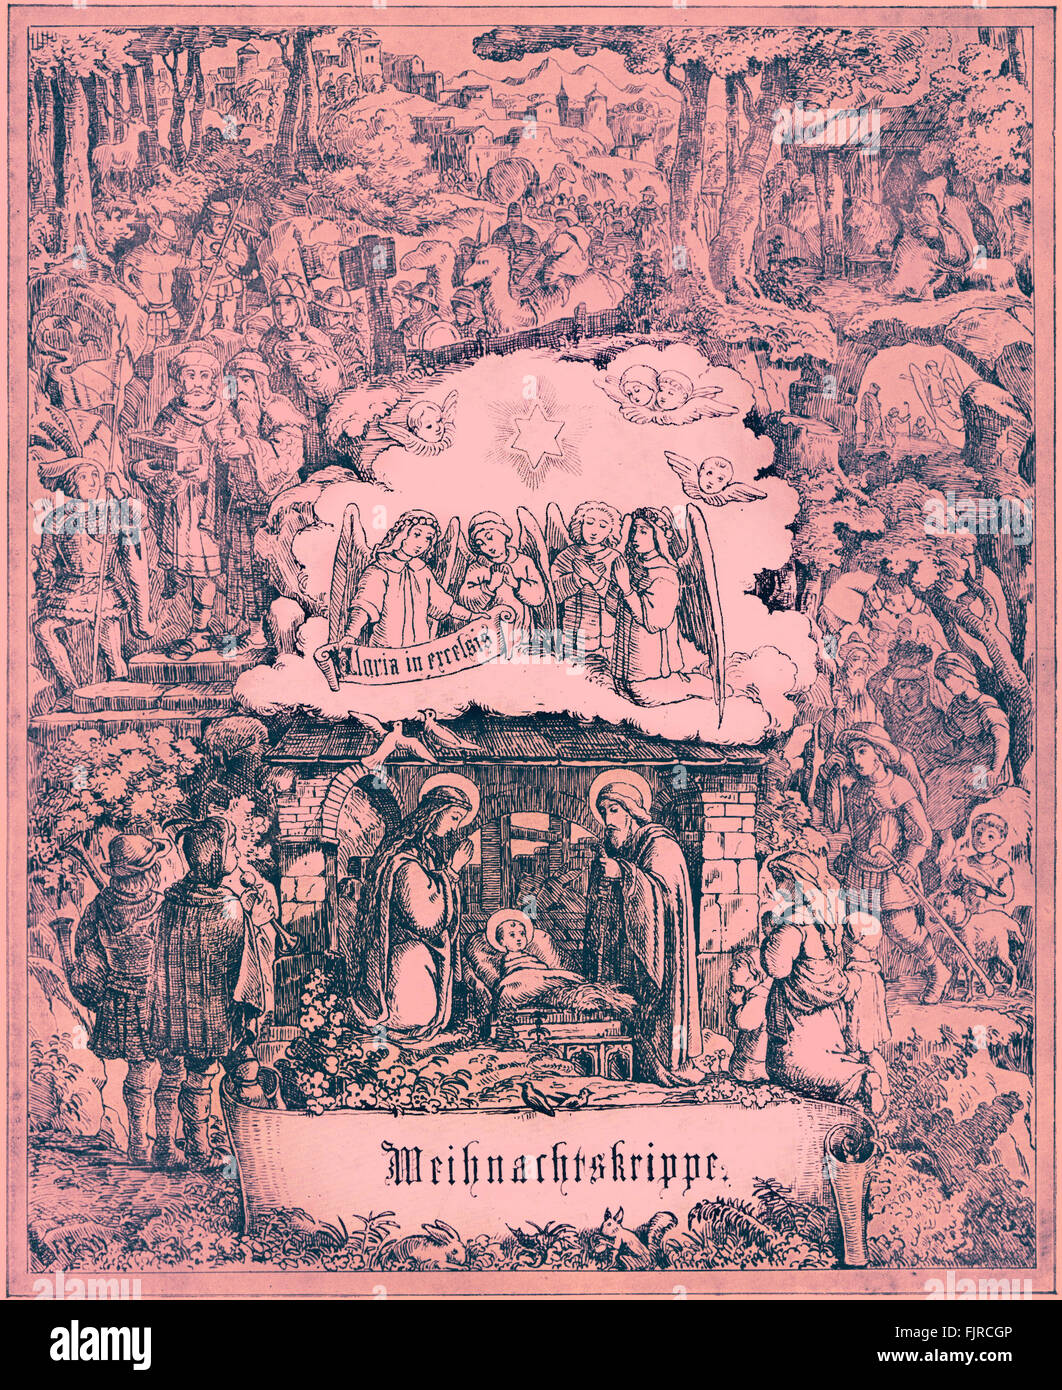 Christmas / Xmas  illustration with Biblical references:  Mary and Joseph with Jesus in manger, star of Bethlehem and angels above, surrounded by shepherds, Three Kings, etc.  19th century woodcut by Franz Pocci. Stock Photo